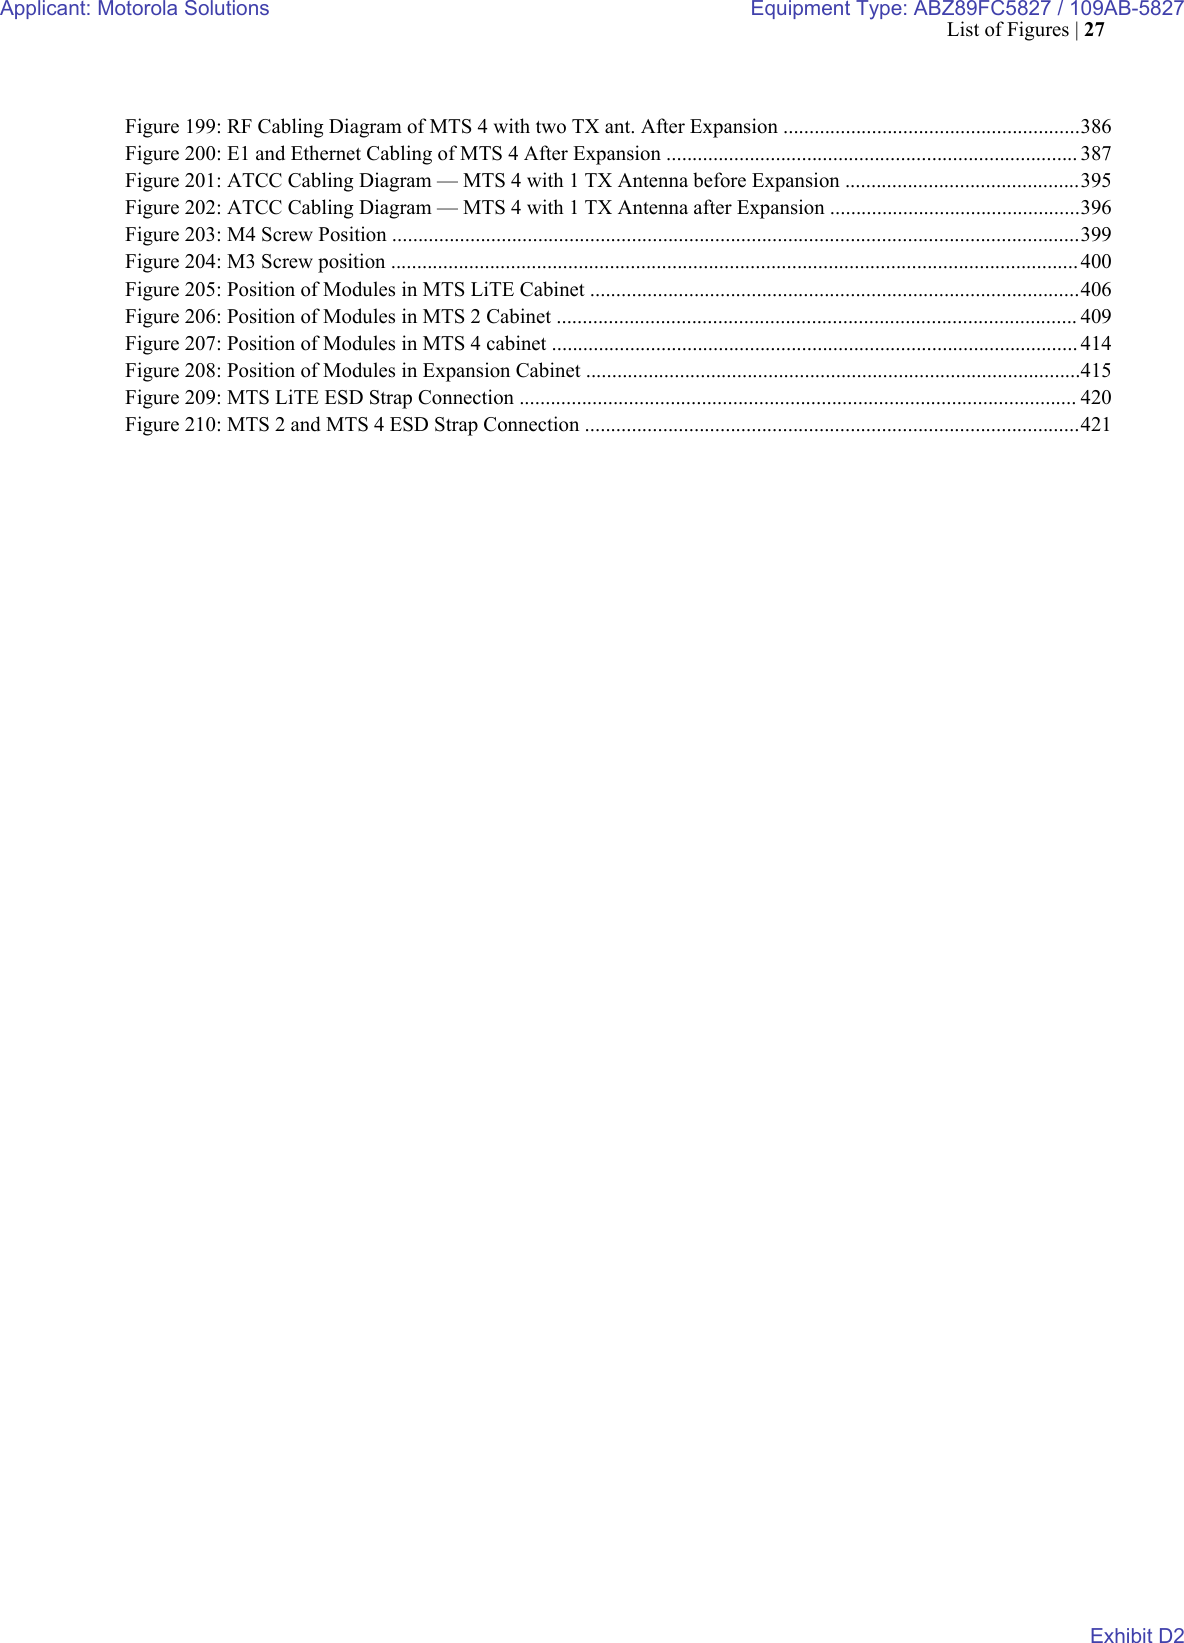 Page 30 of Motorola Solutions 89FC5827 Non Broadcast Transmitter User Manual Summit BR 800 Tx FCC Filing 3